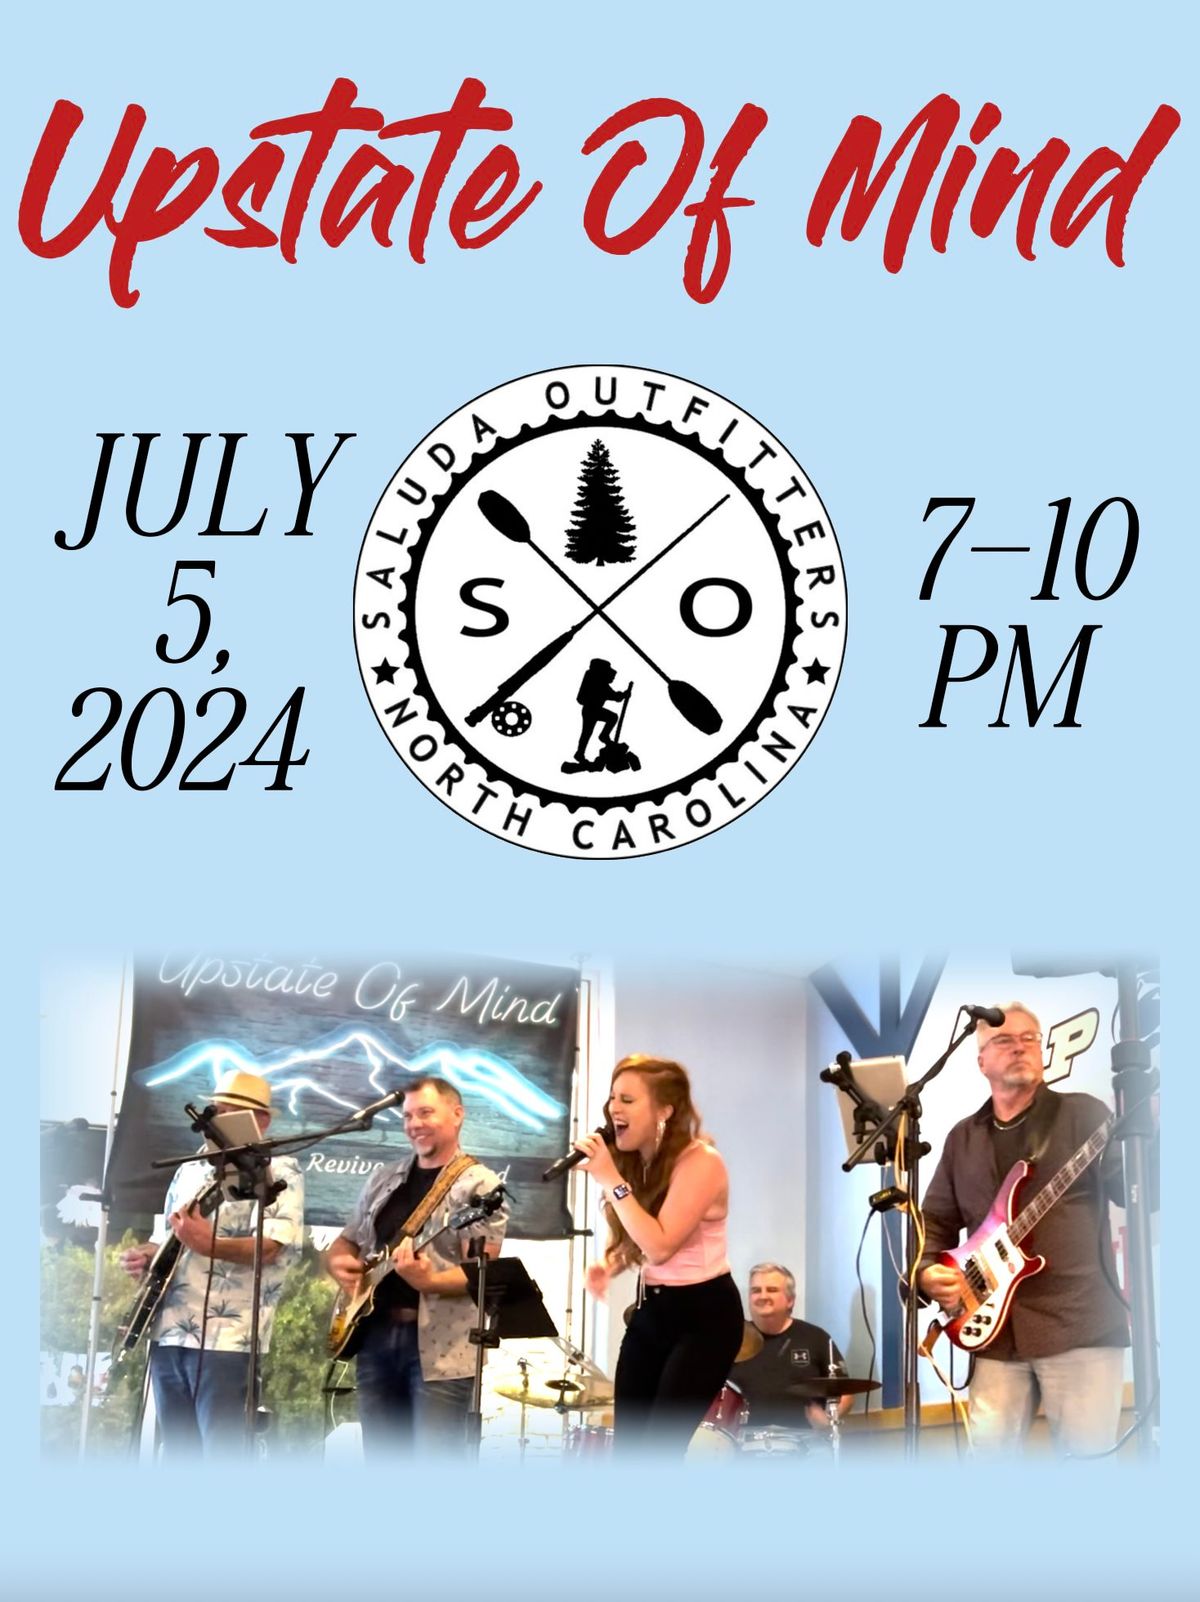 Upstate of Mind Celebrates 4th of July at Saluda Outfitters